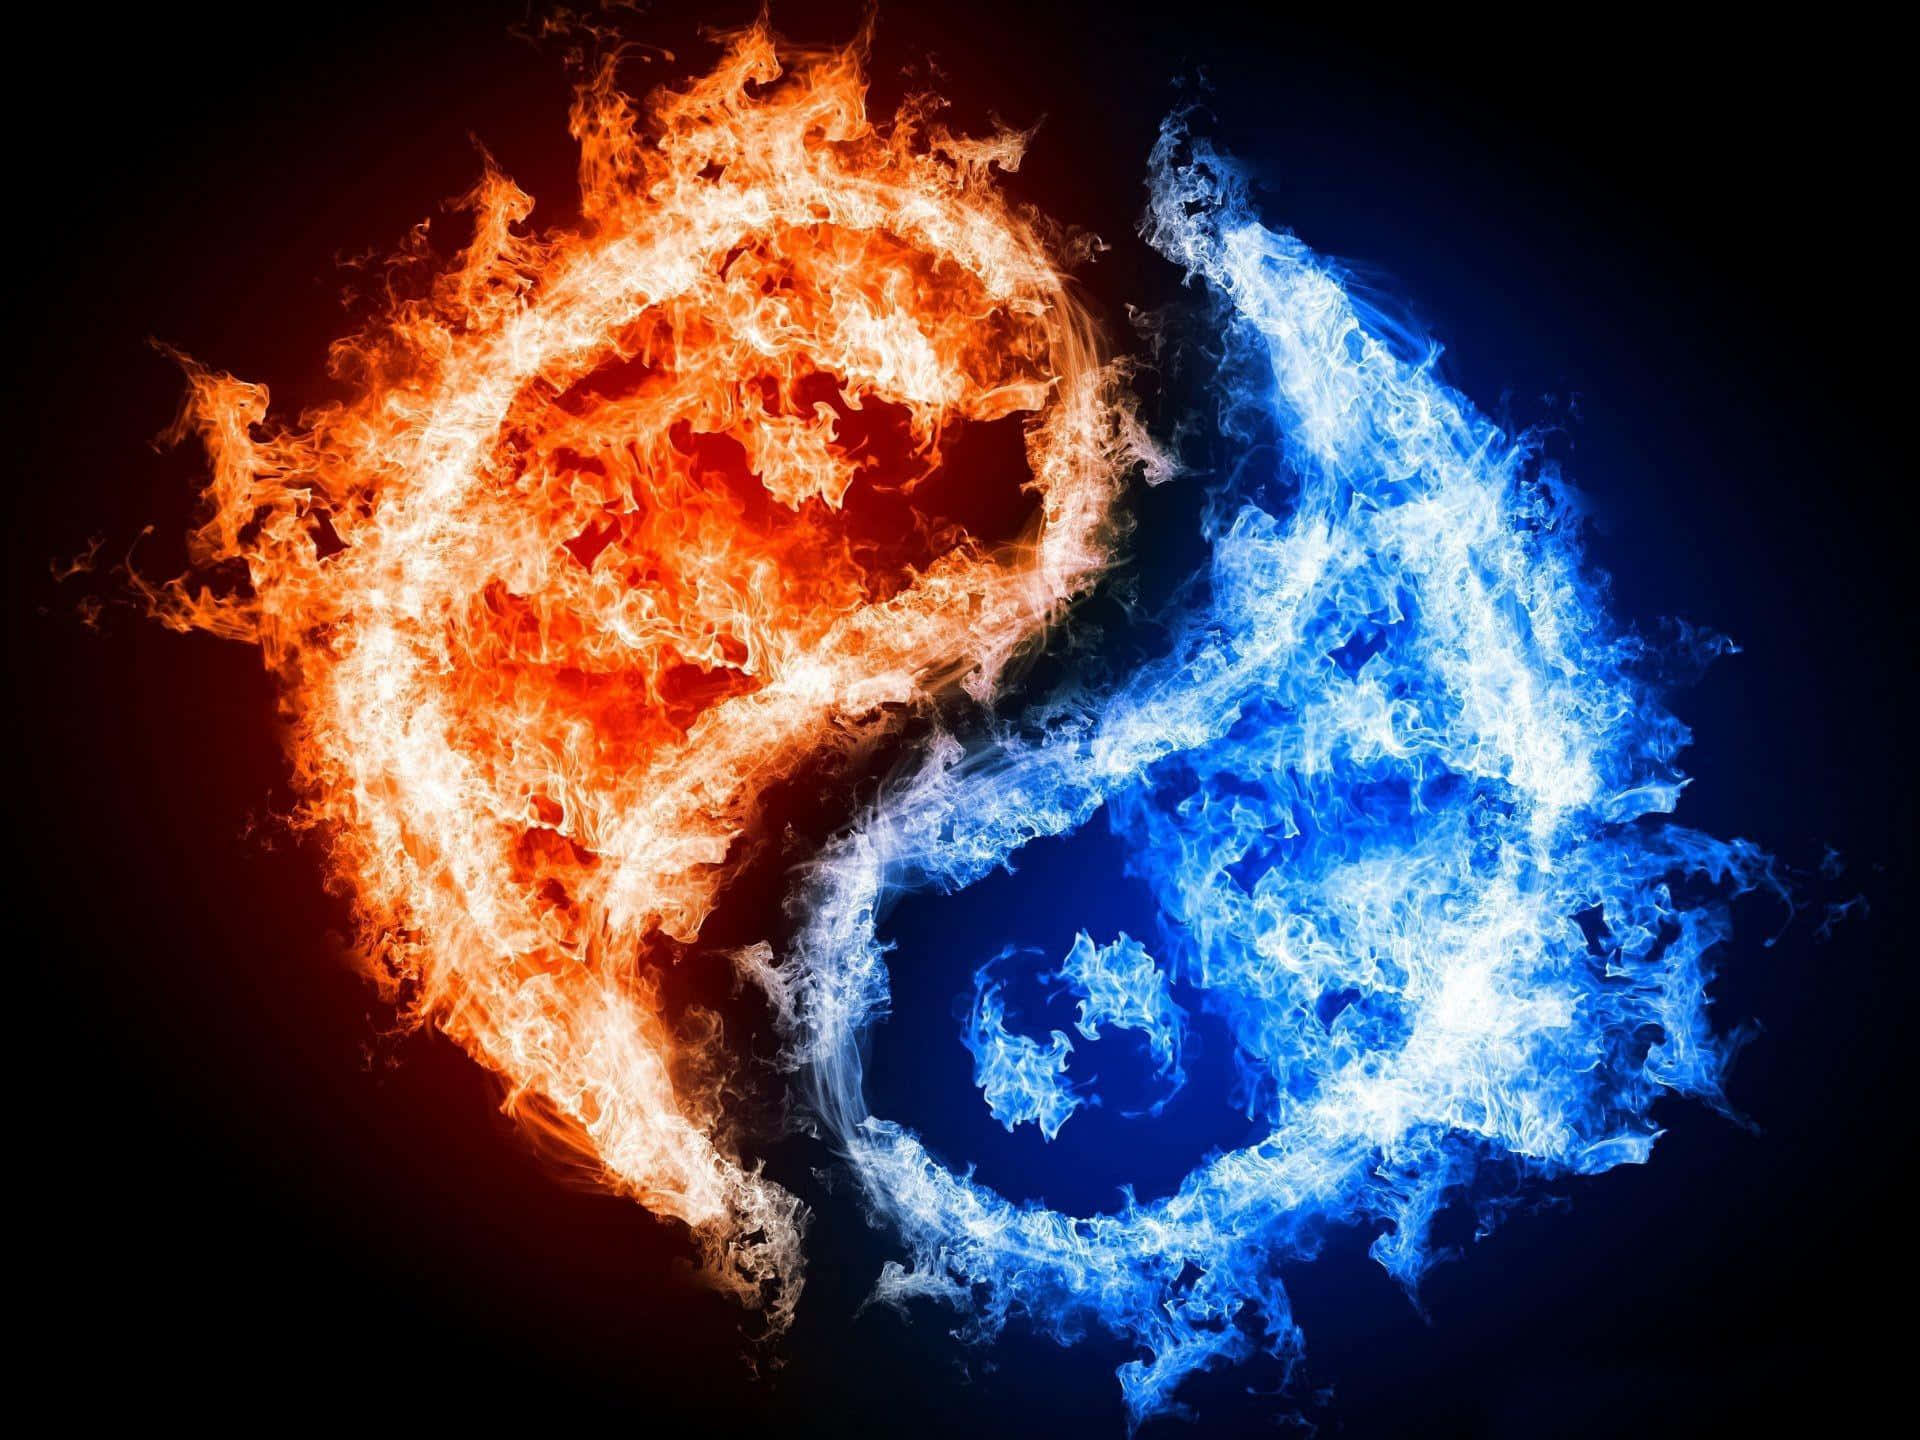 A Blue And Blue Yin Yang Symbol On A Black Background Wallpaper